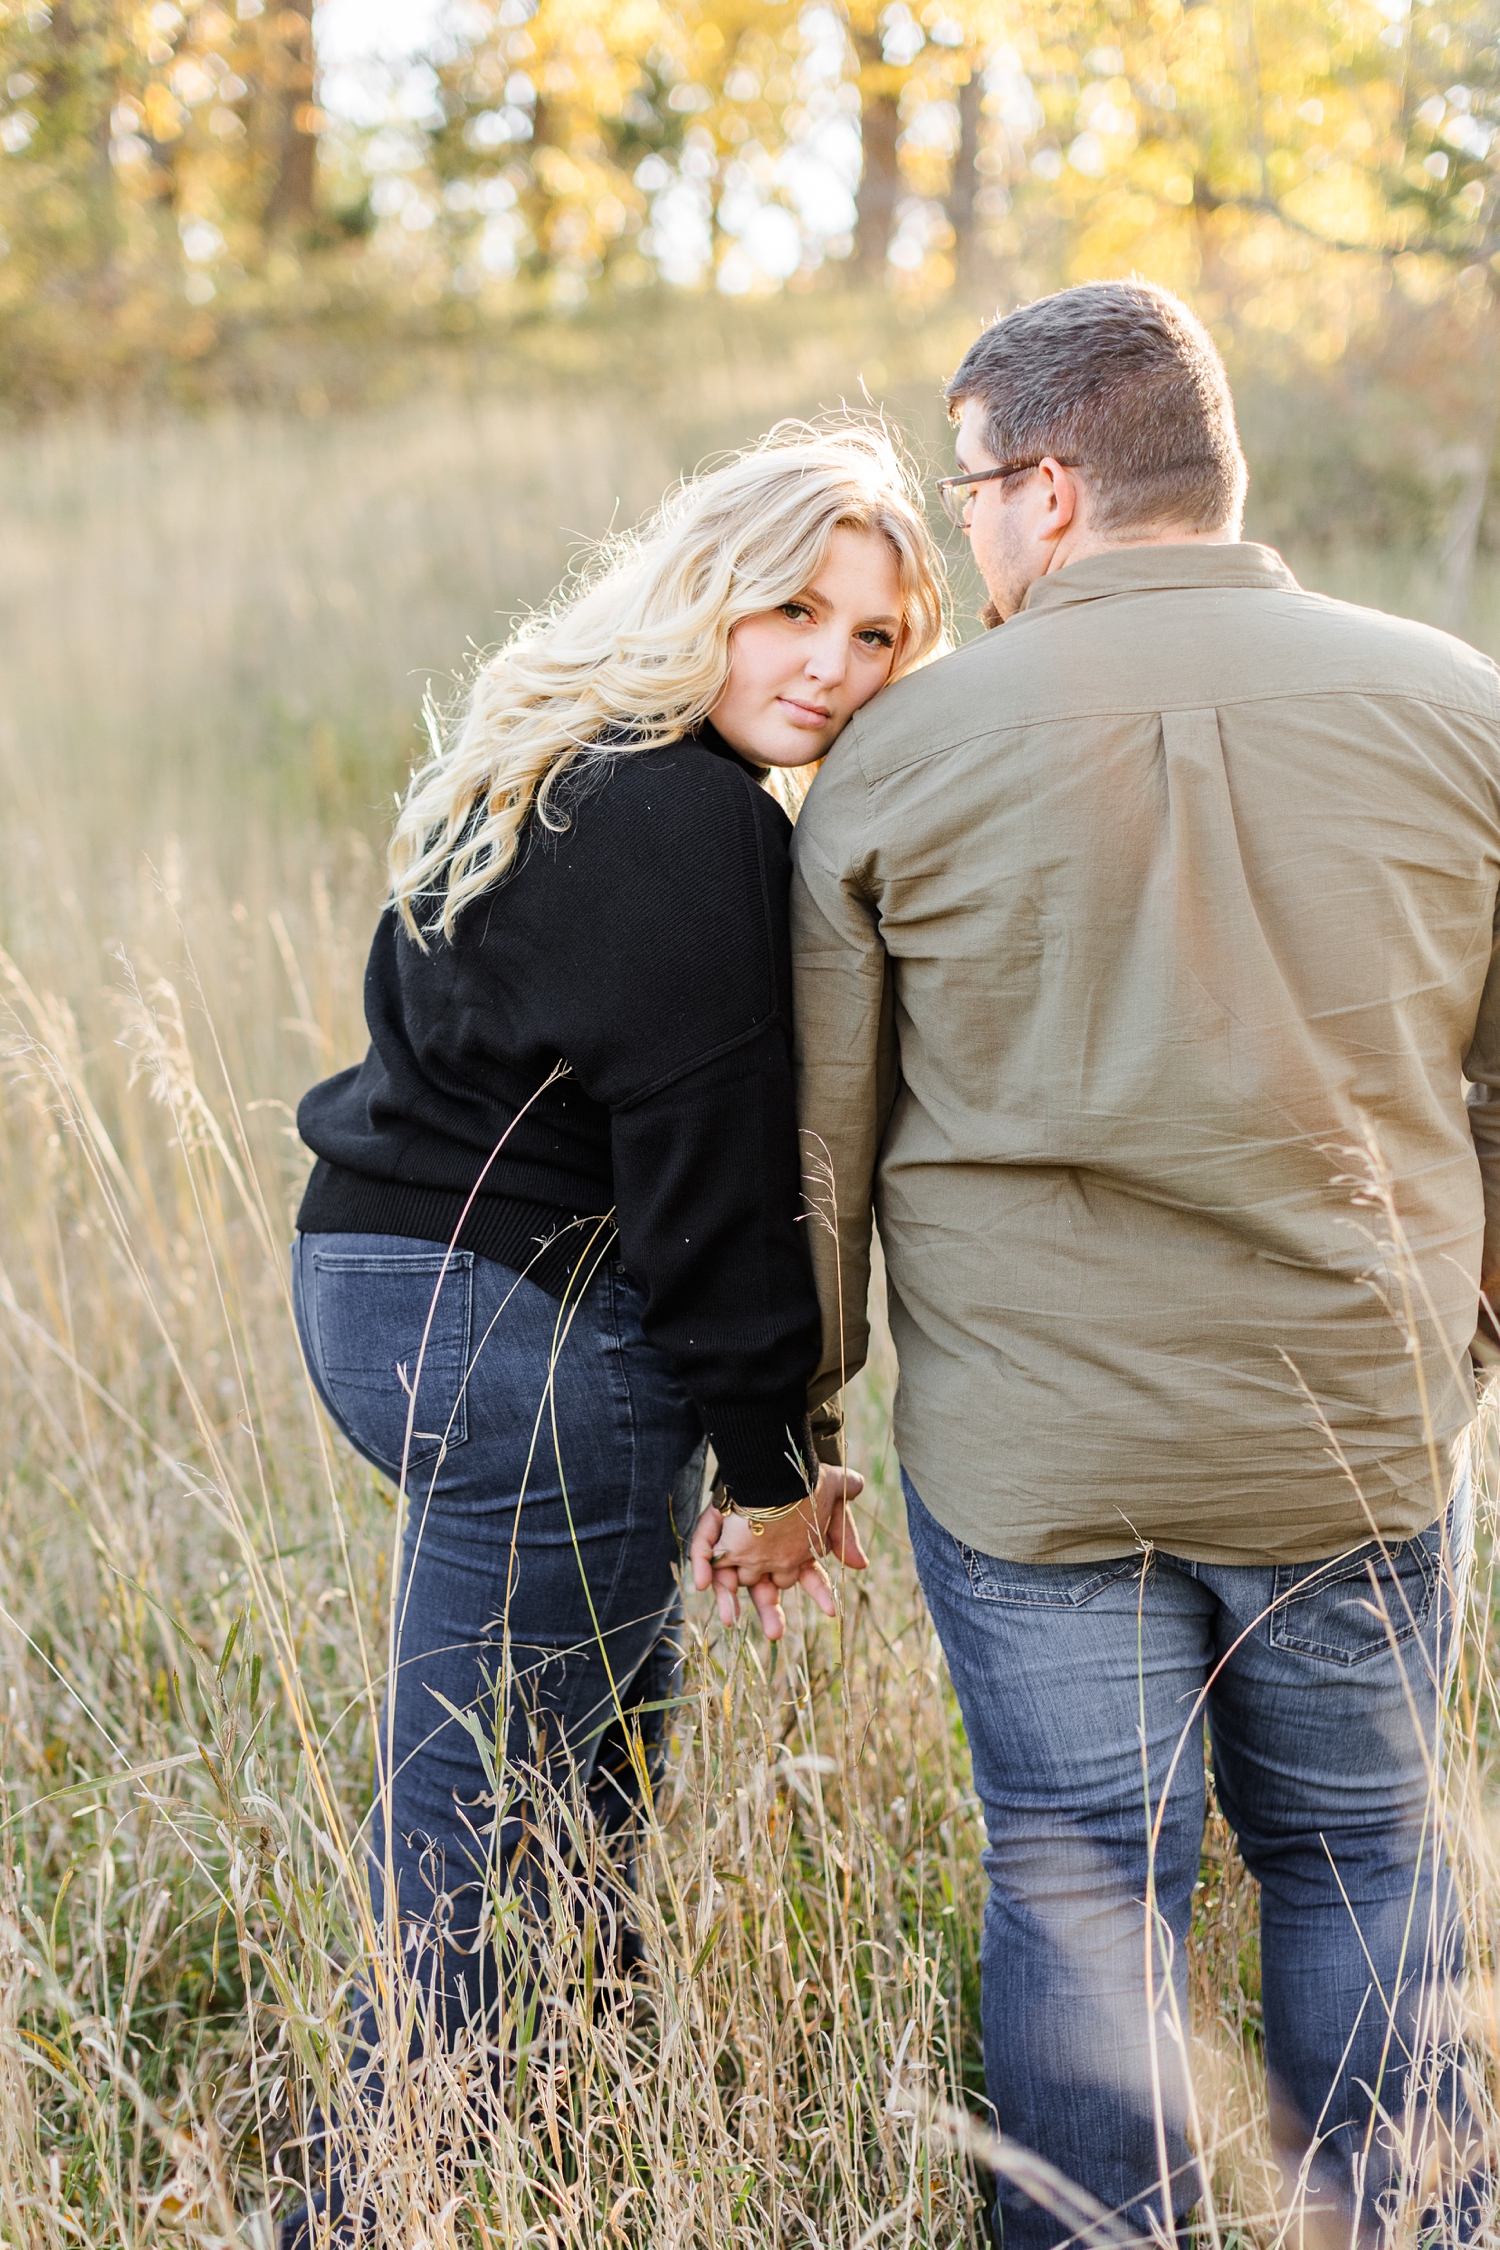 Halie leans her cheek against Nick's shoulder and looks back while Nick looks at her in the middle of a grassy pasture | CB Studio